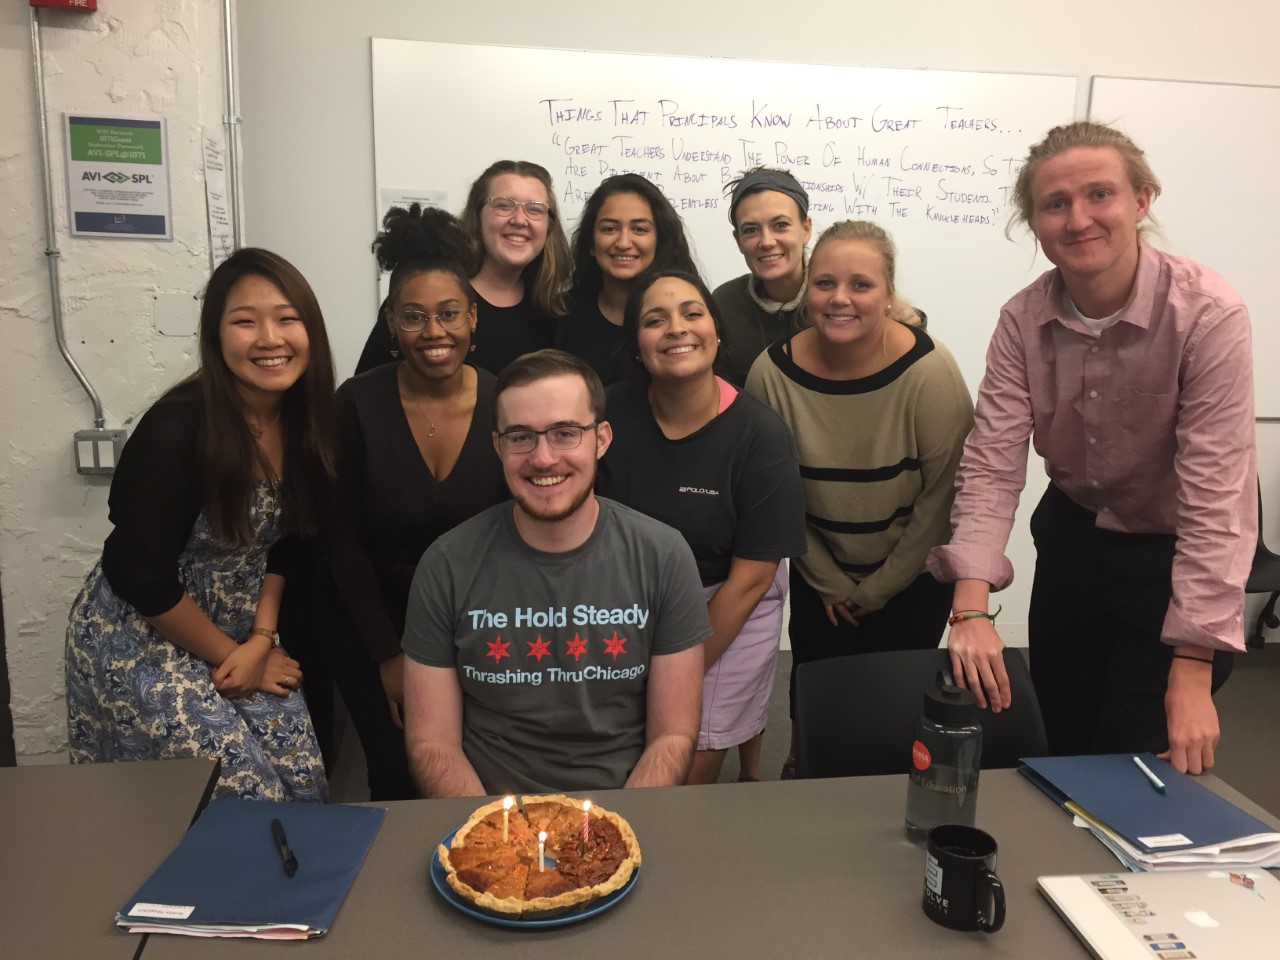 A group of students celebrating a birthday with a birthday pie